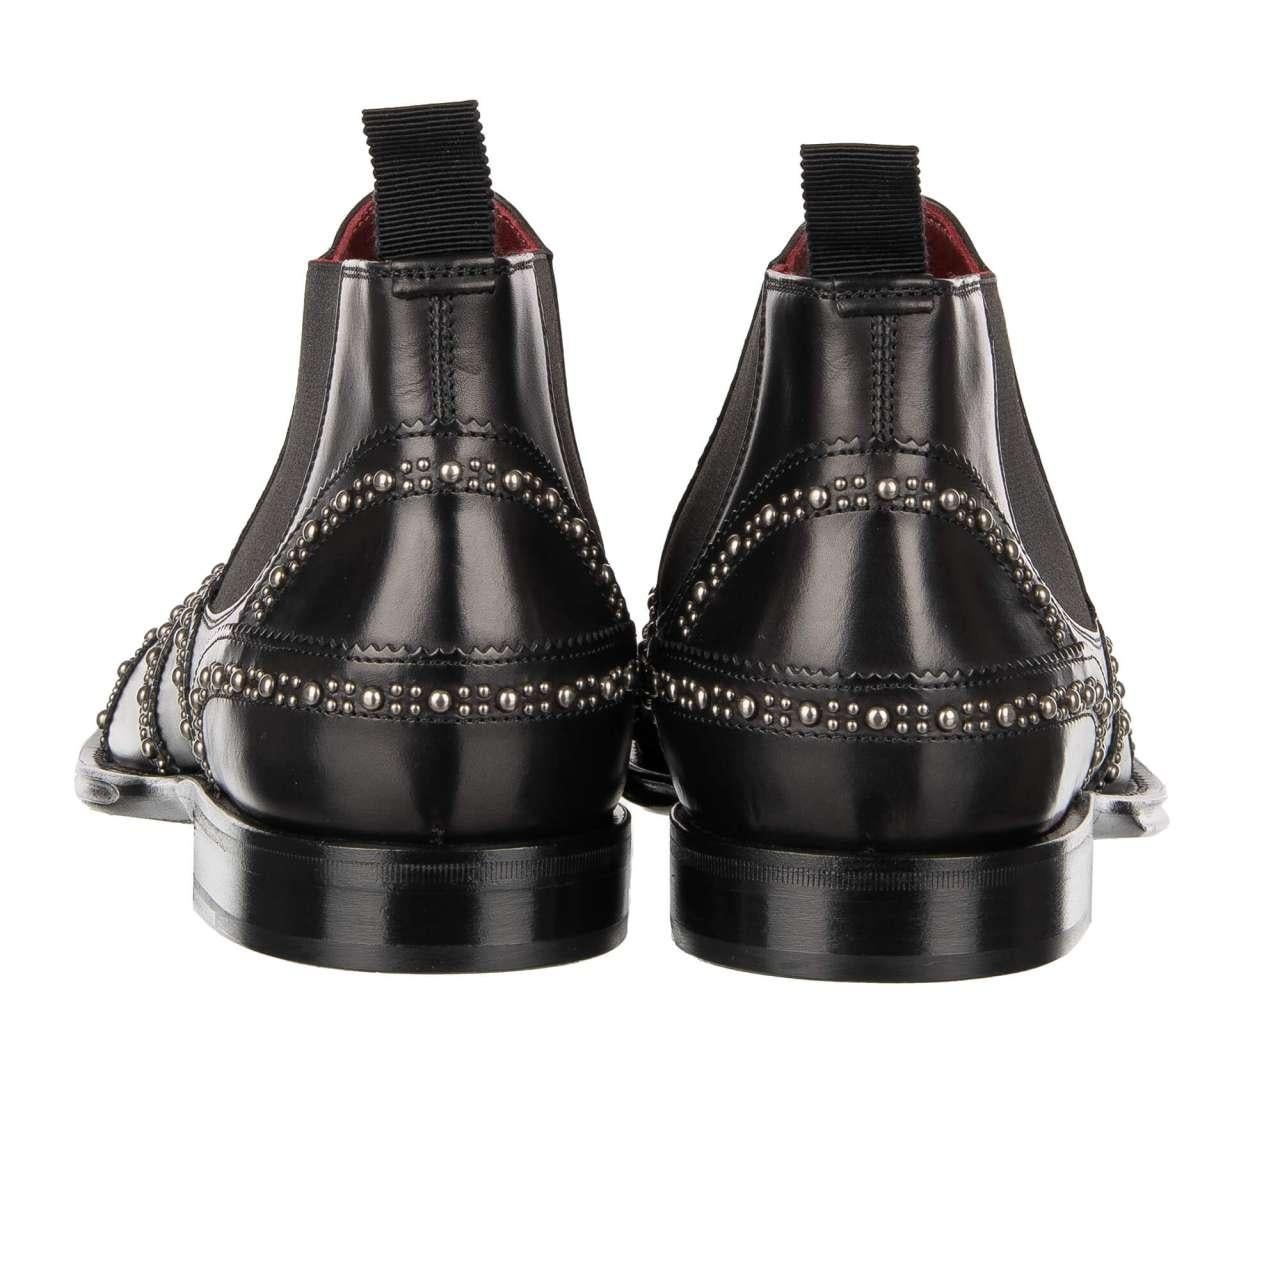 Dolce & Gabbana Studded Leather Ankle Boots Shoes MARSALA Black EUR 41.5 For Sale 2